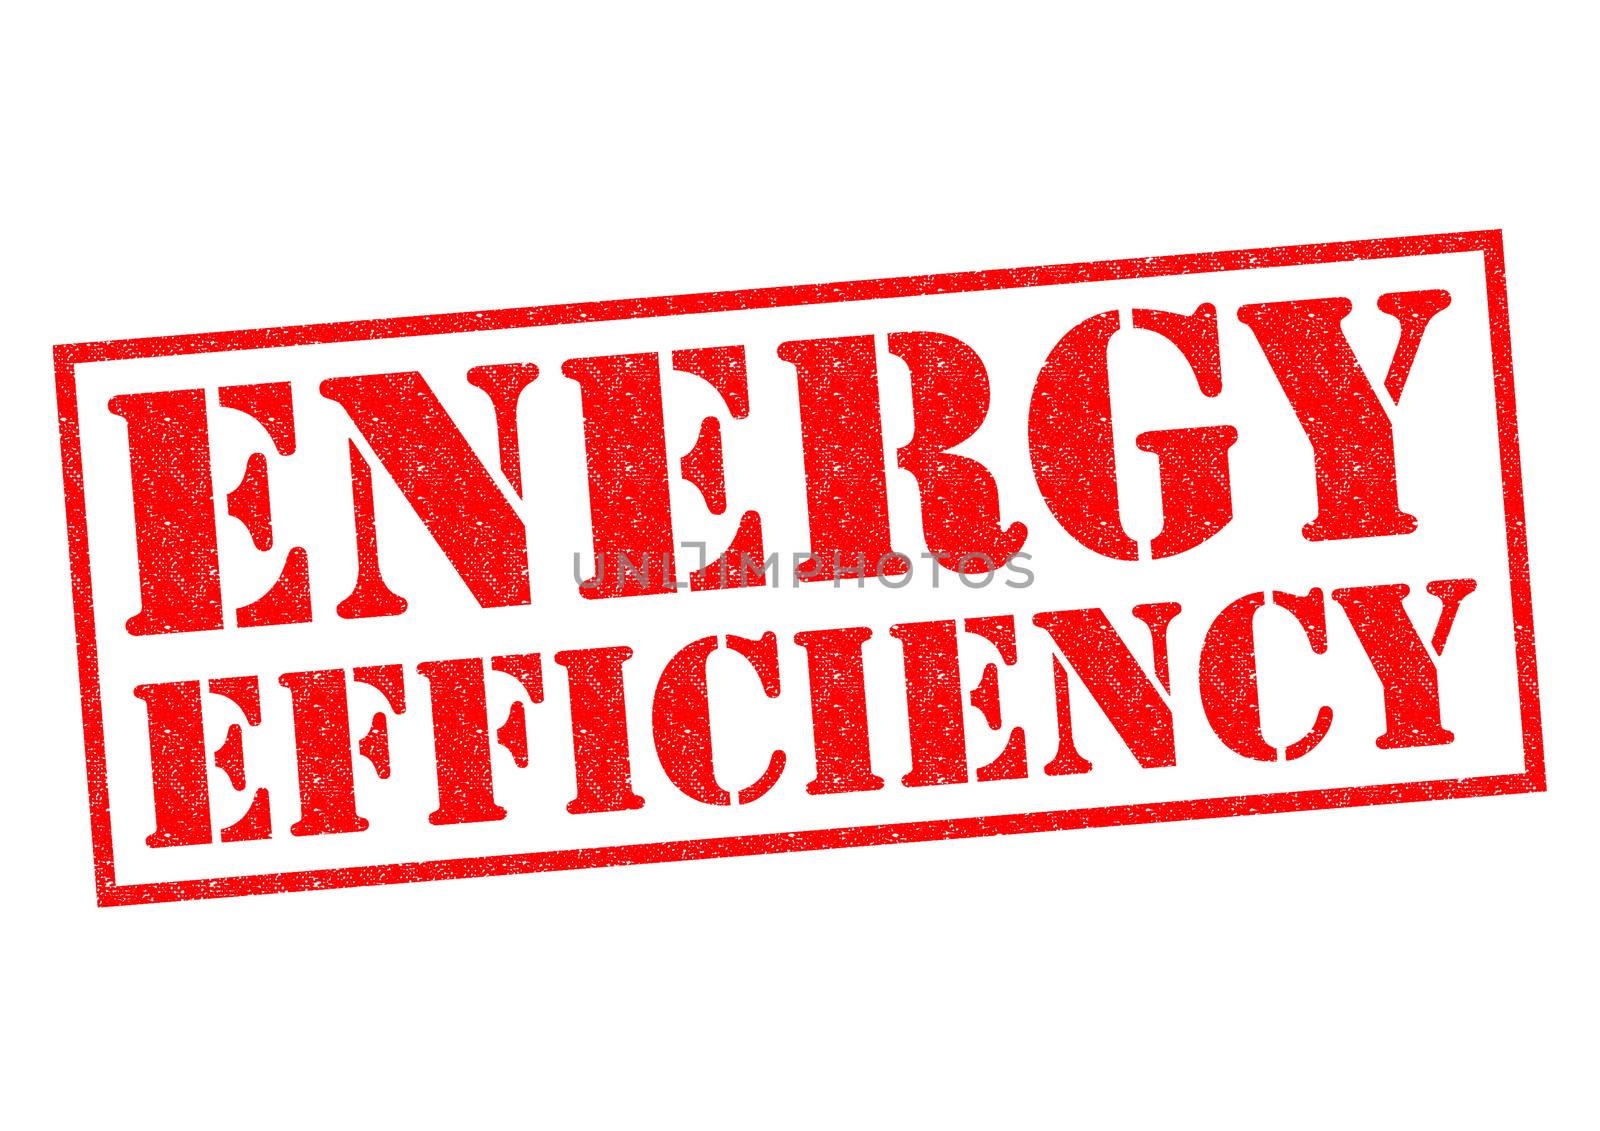 ENERGY EFFICIENCY red Rubber Stamp over a white background.